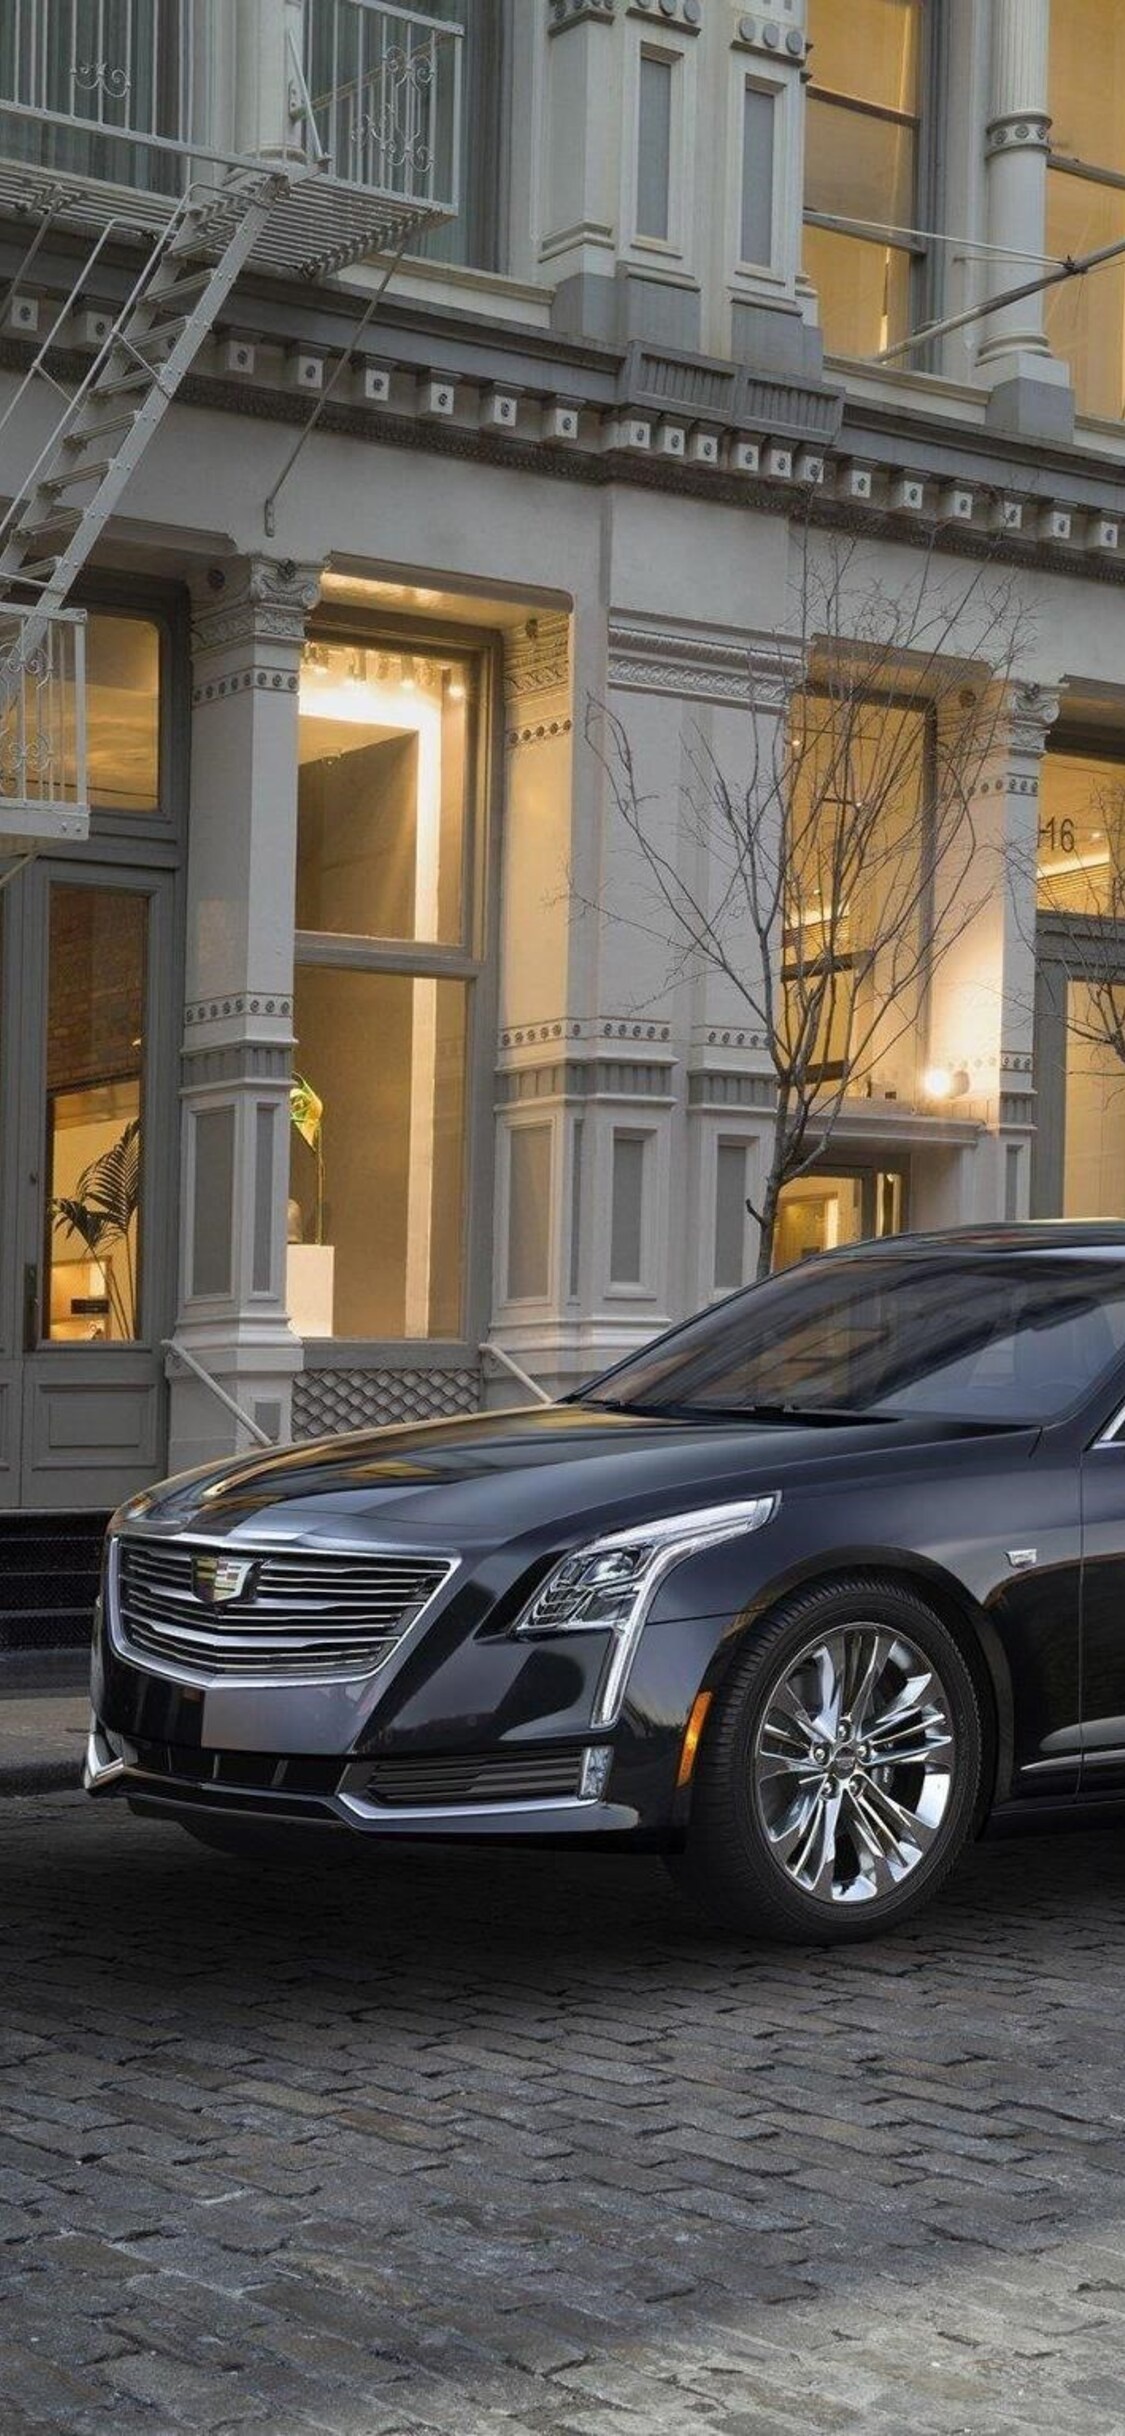 General Motors, Cadillac CT6, High-quality wallpapers, Luxury automotive, 1130x2440 HD Phone